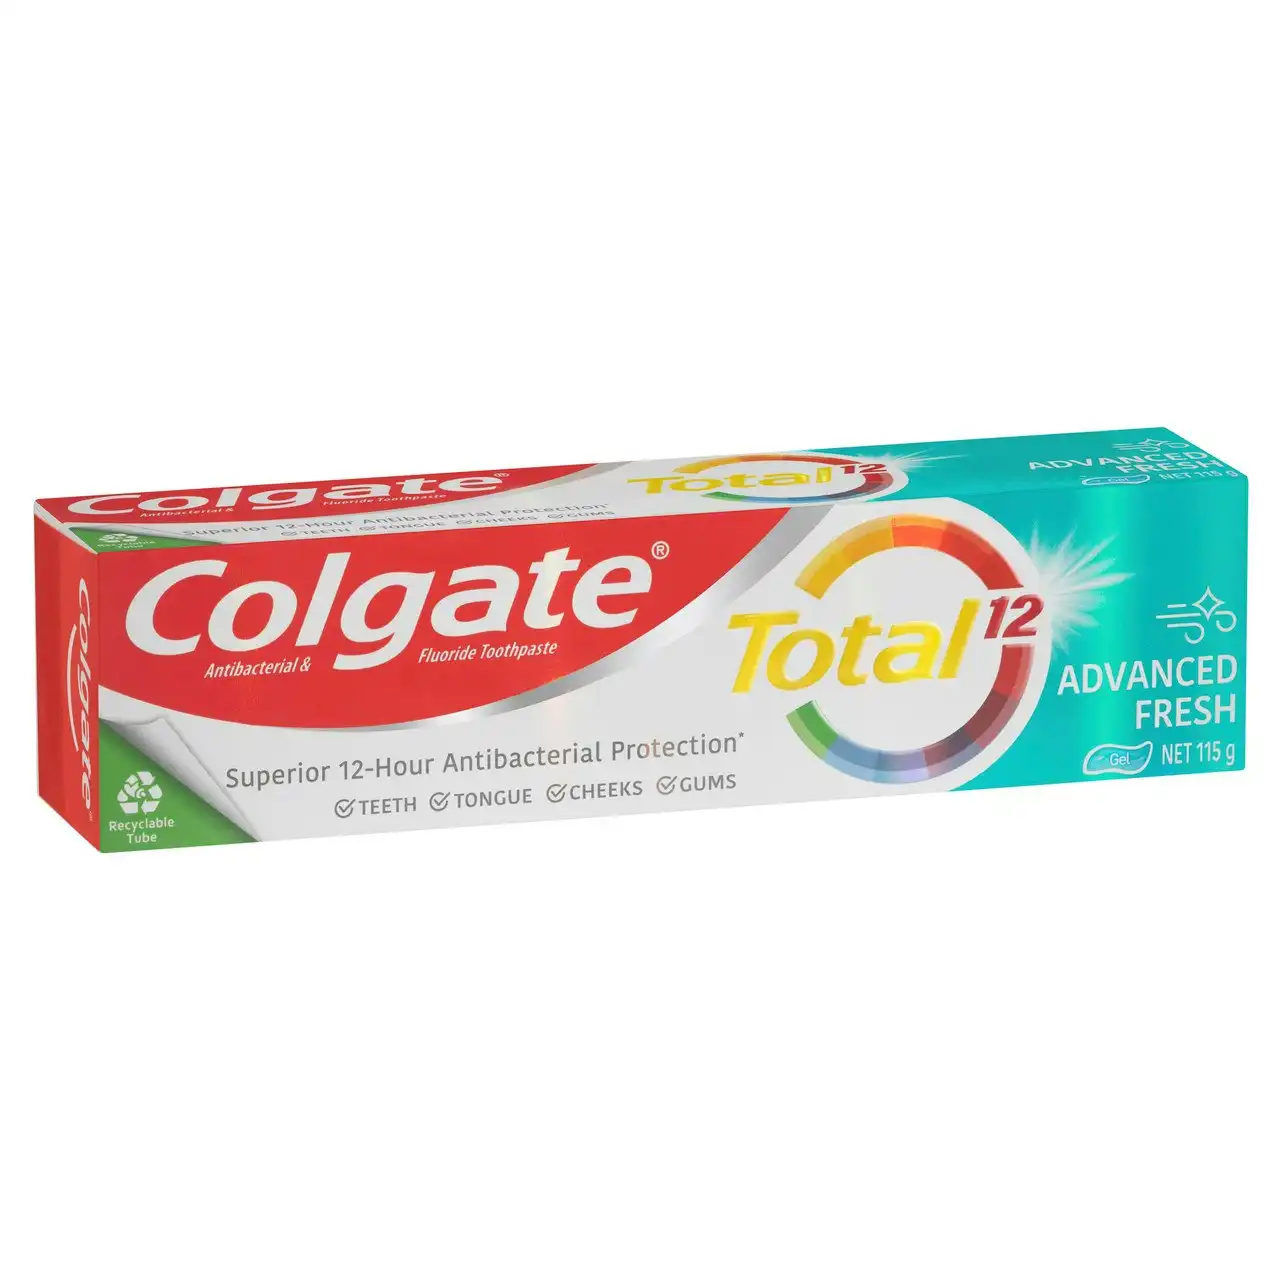 Colgate Total Advanced Fresh Gel Antibacterial Toothpaste 115g, Whole Mouth Health, Multi Benefit